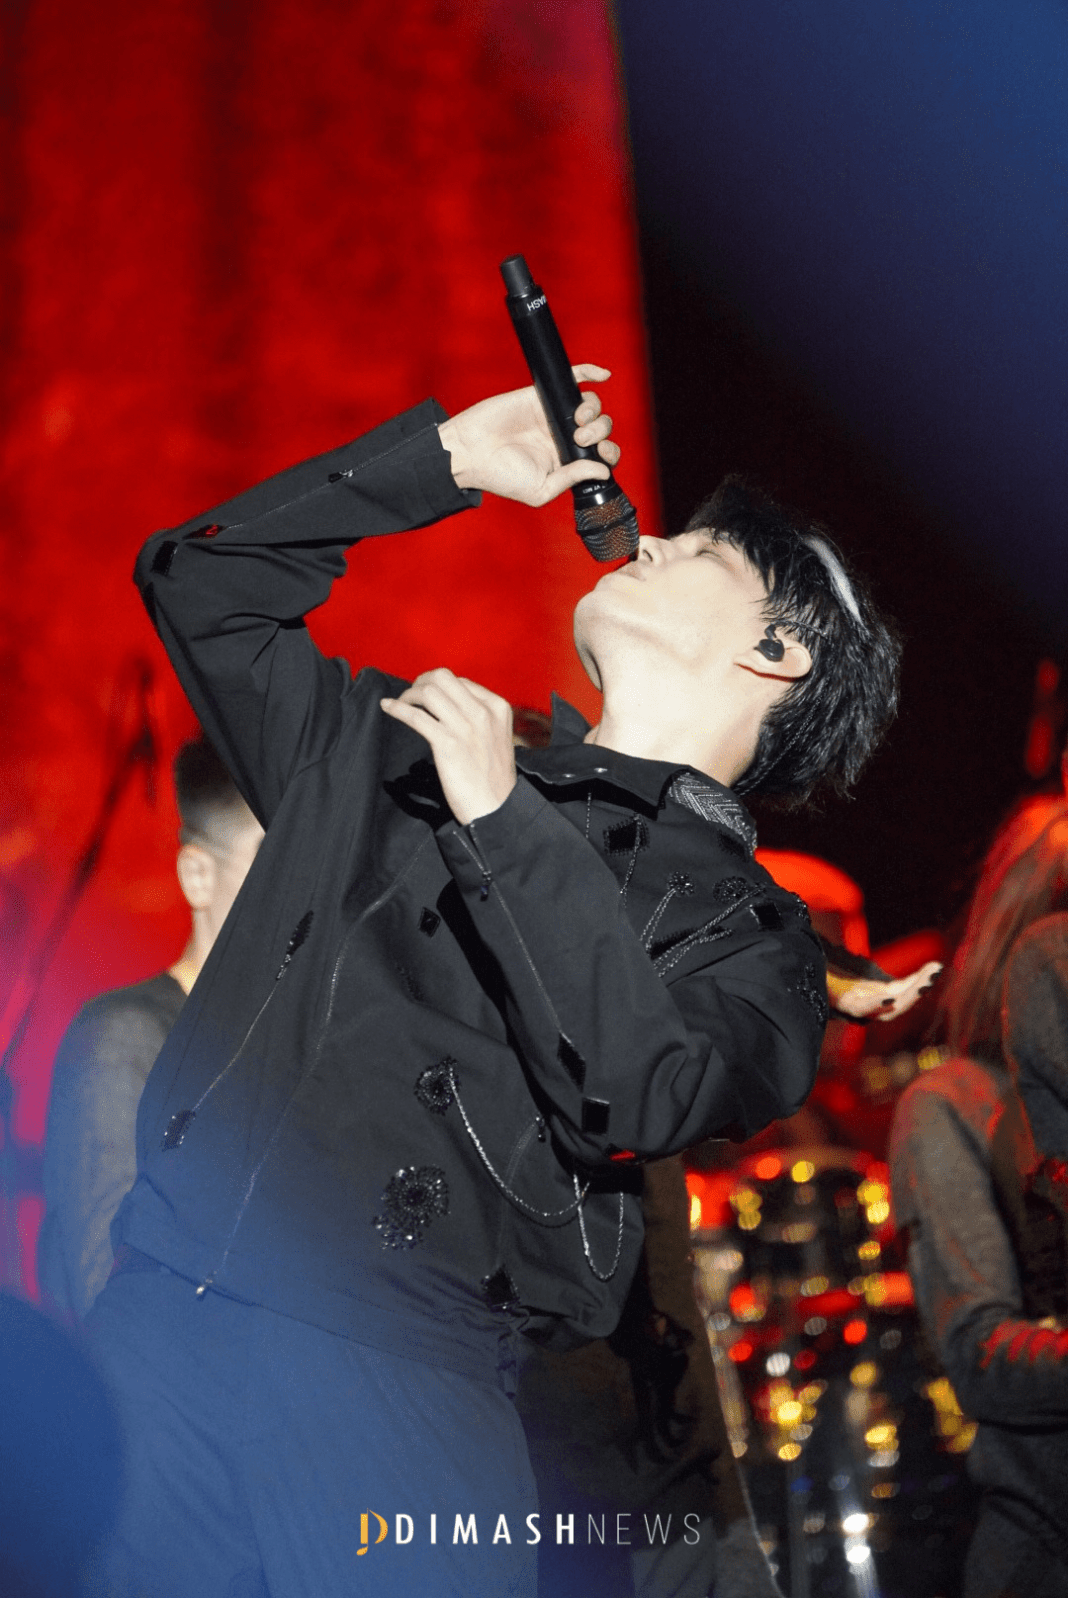 Sold out in Budapest - Dimash's "Stranger" tour continued with a solo concert in Hungary